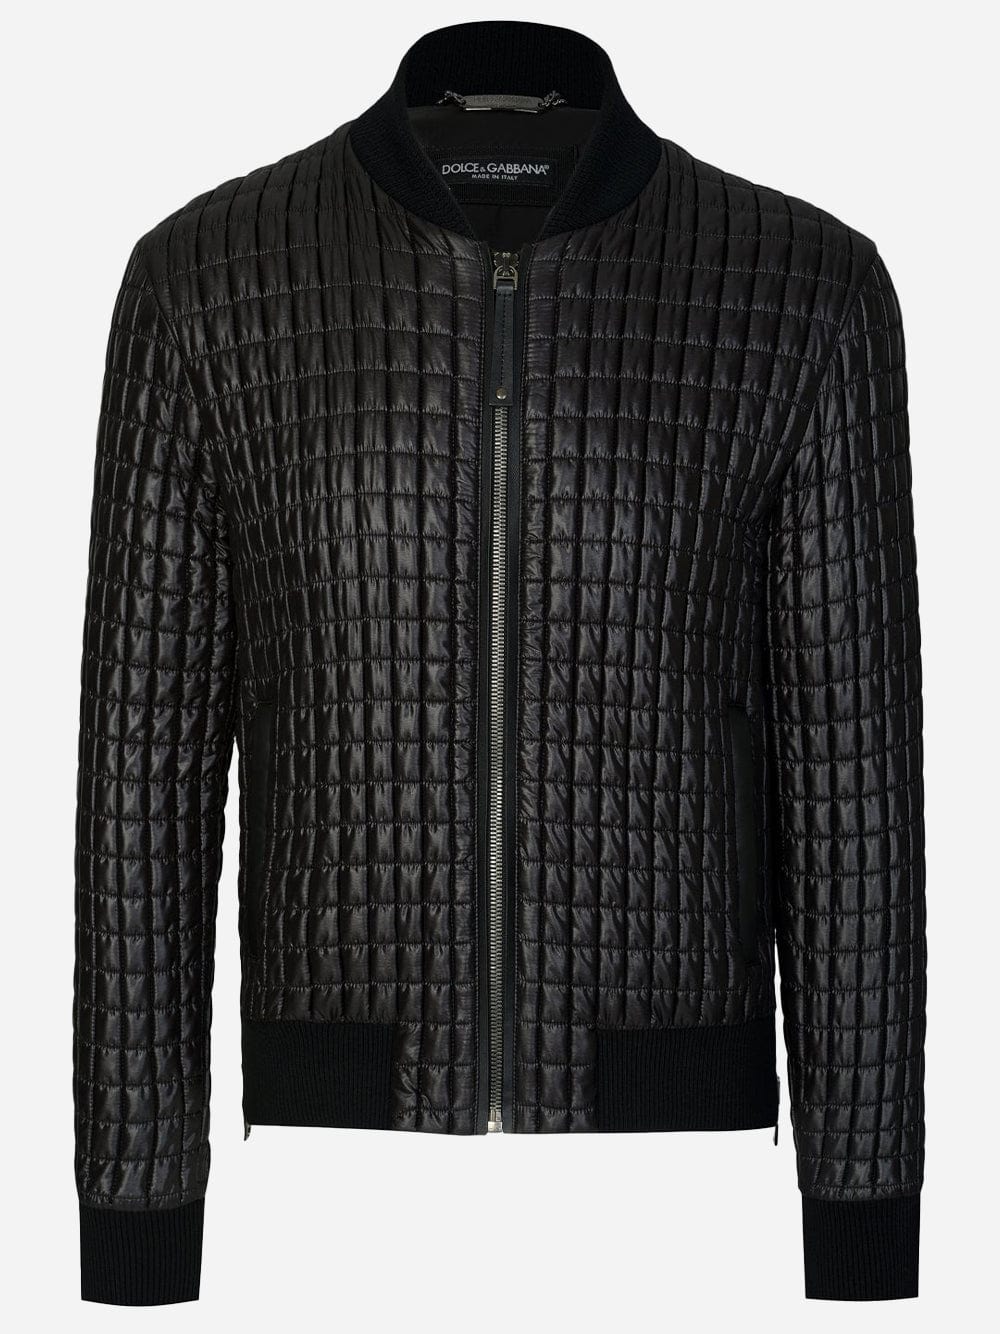 Dolce & Gabbana Zipped Quilted Bomber Jacket